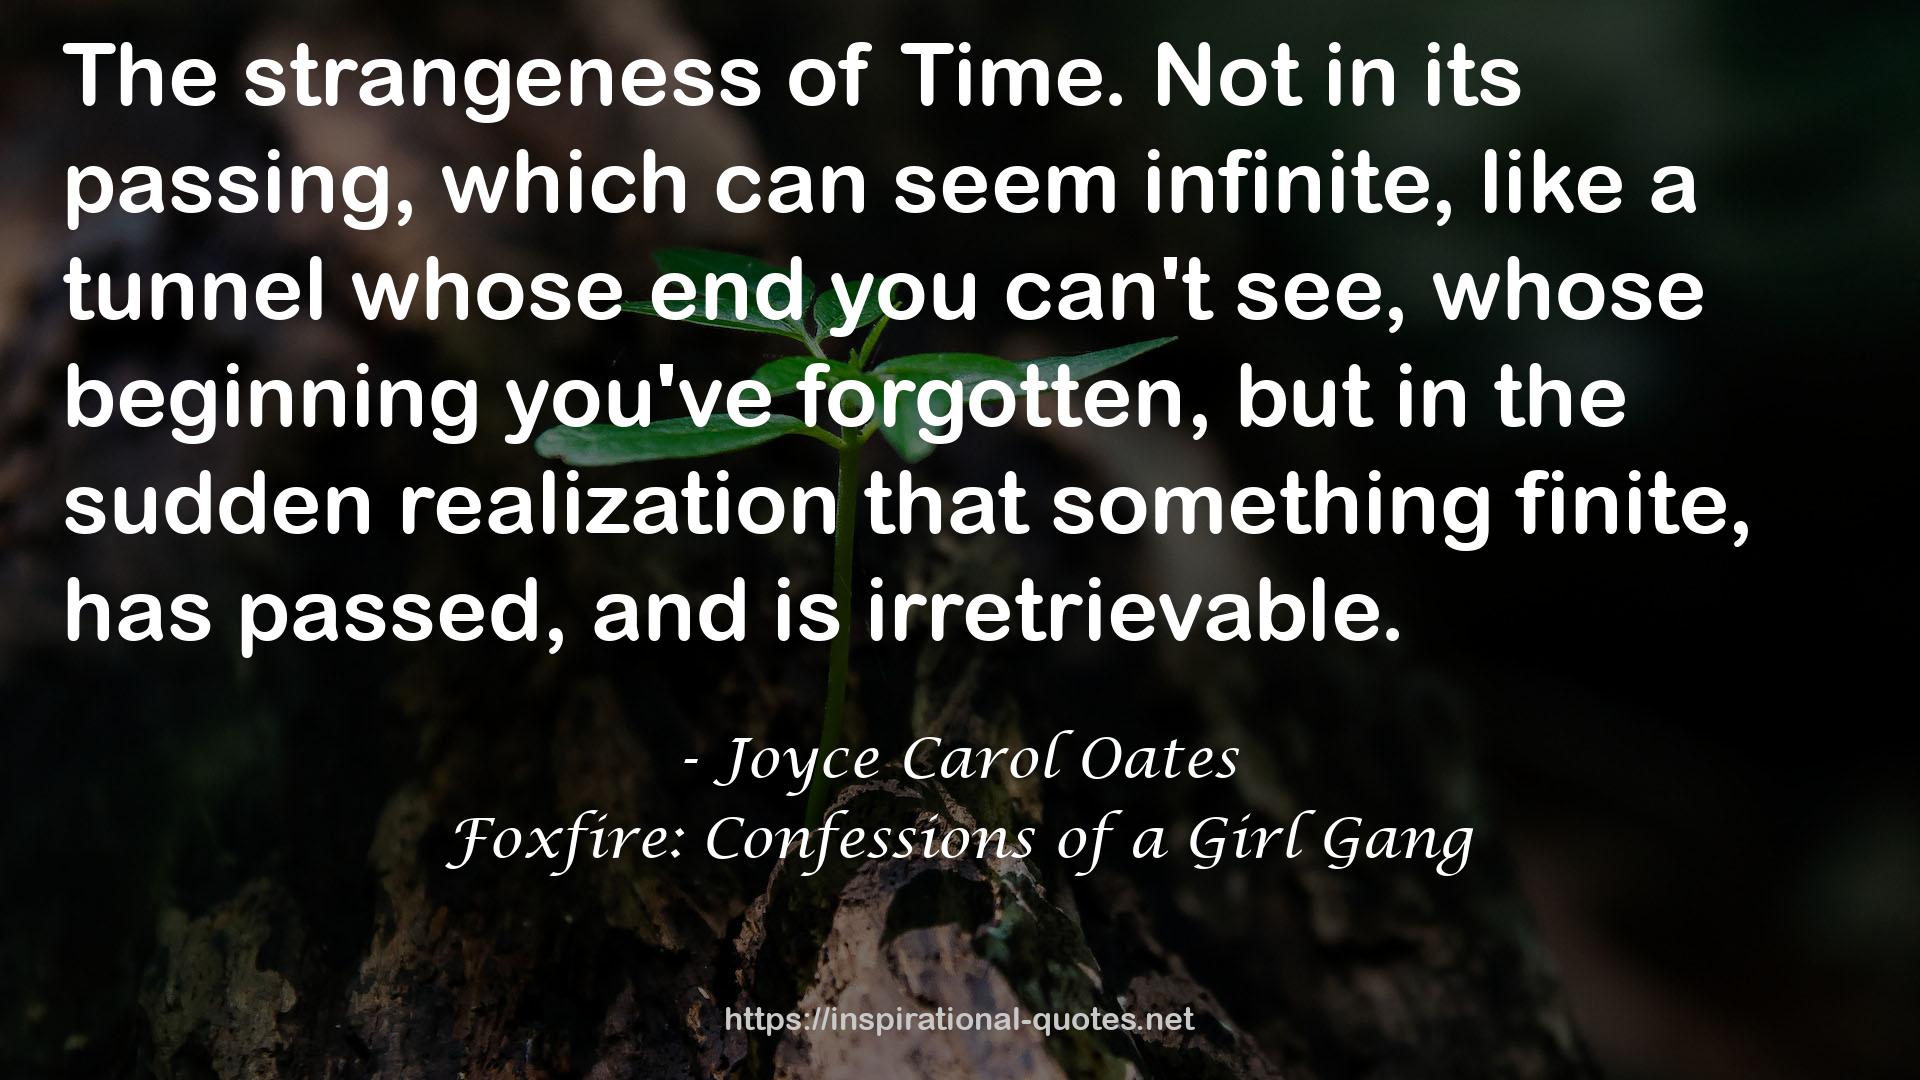 Foxfire: Confessions of a Girl Gang QUOTES